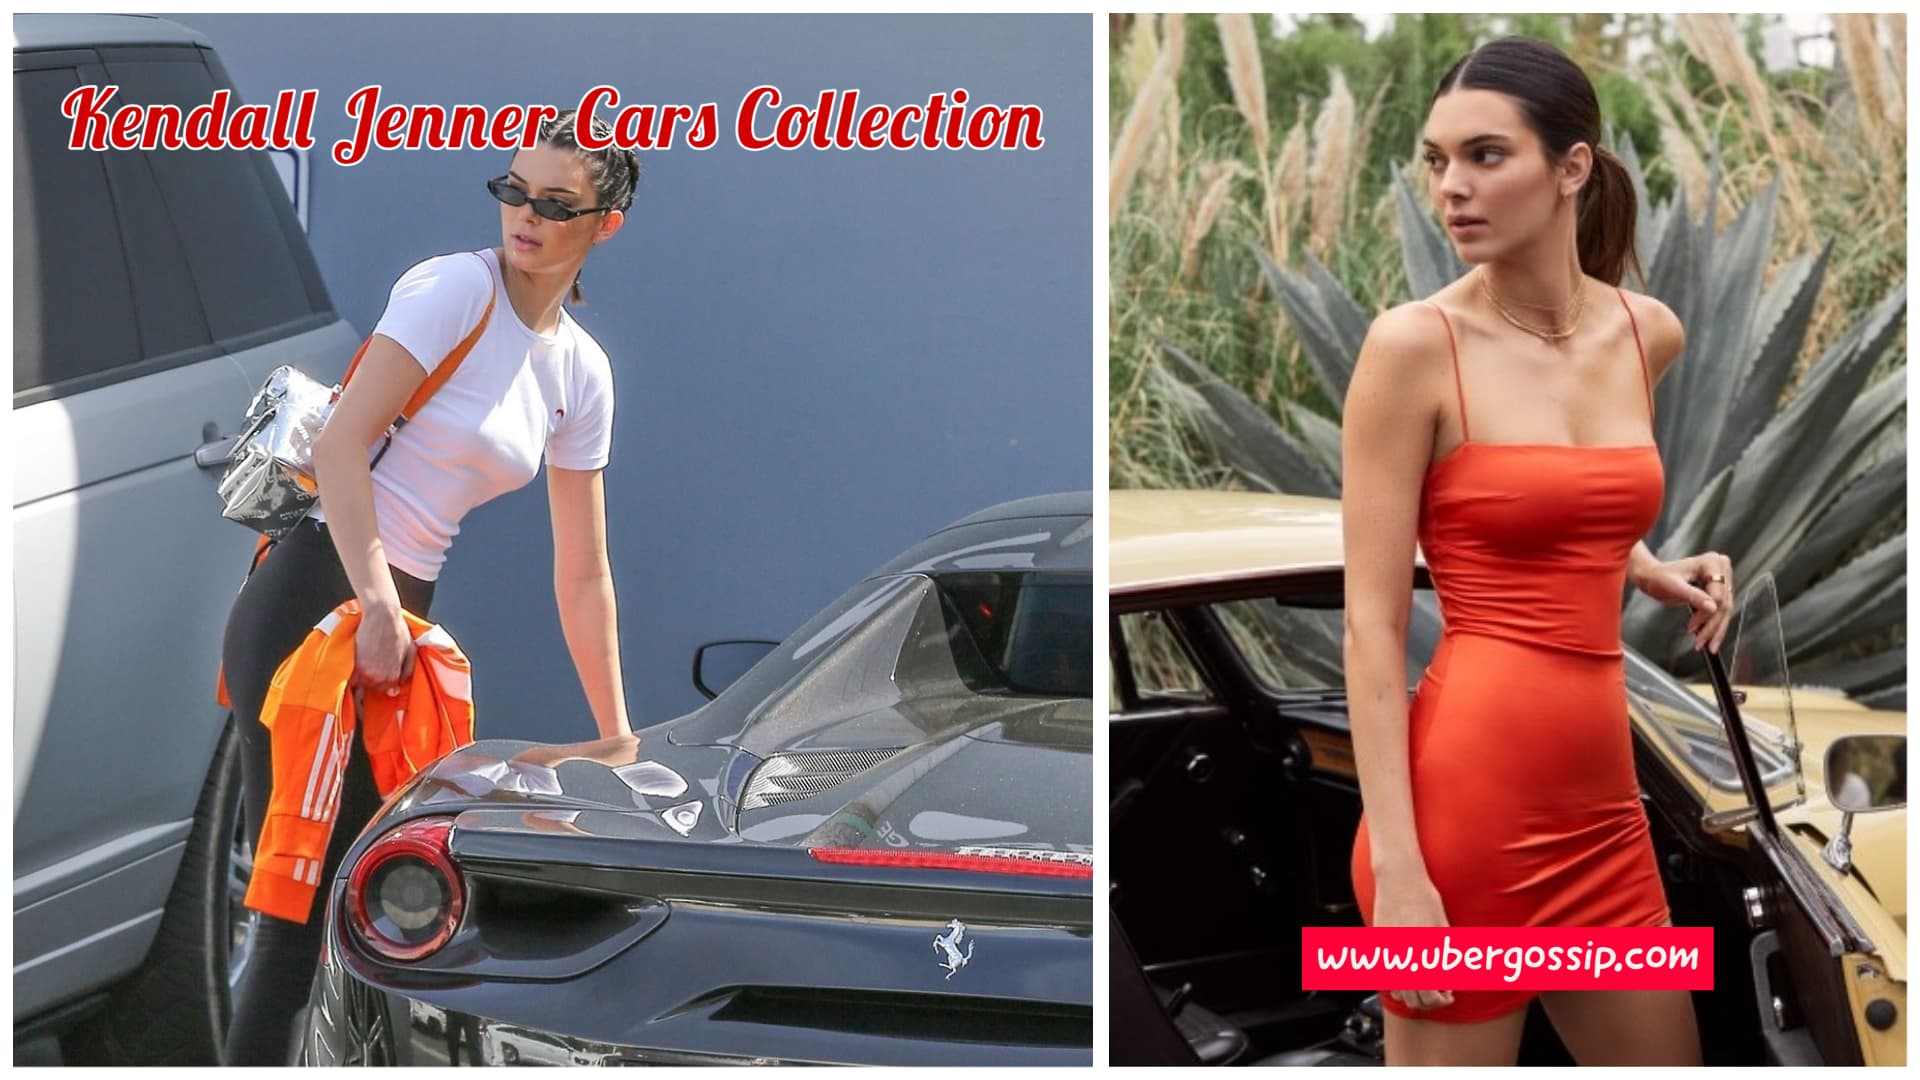 Celebrity Cars, how many cars does Kendall Jenner have, Kendall cars, Kendall Jenner, Kendall Jenner car, Kendall Jenner Car Mercedes, Kendall Jenner Cars, Kendall Jenner Cars Collection, Kendall Jenner G Wagon